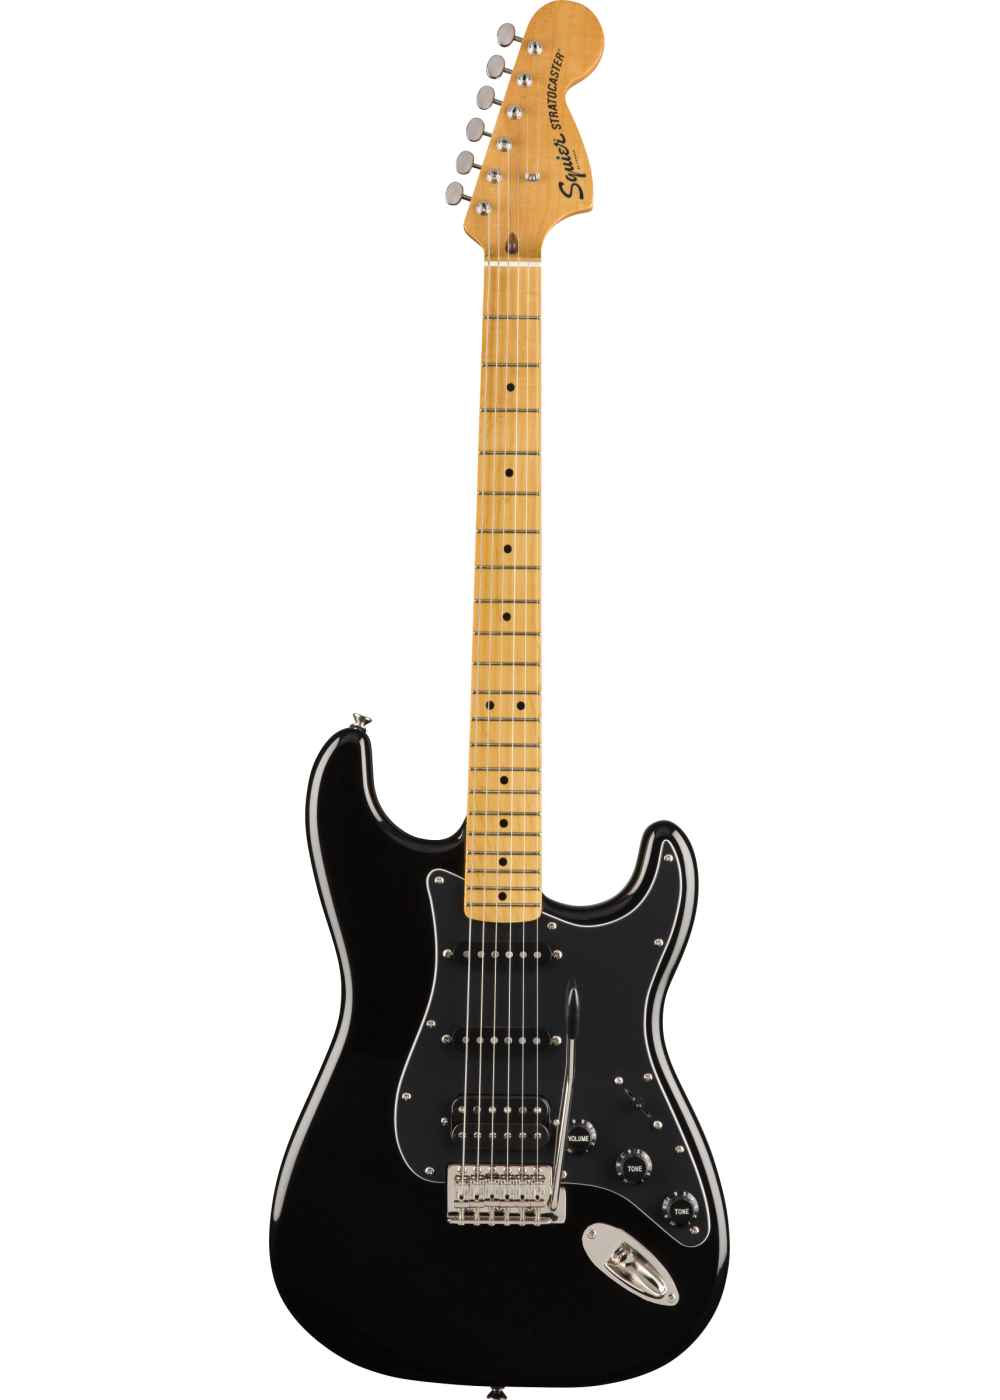 Squier Classic Vibe '70s Stratocaster® HSS